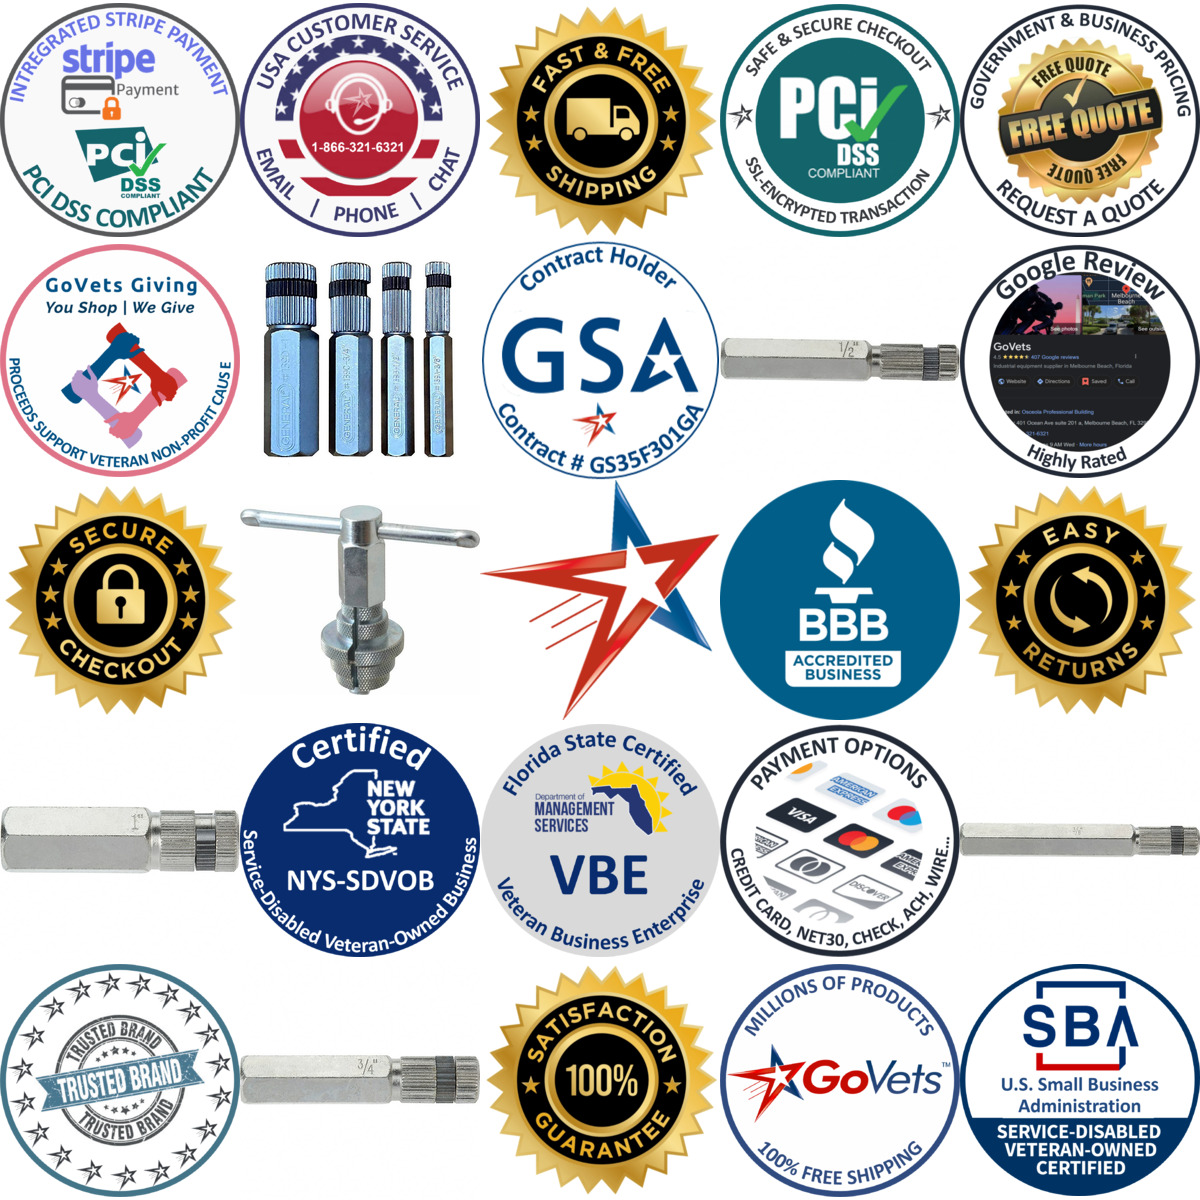 A selection of Internal Pipe Wrenches products on GoVets